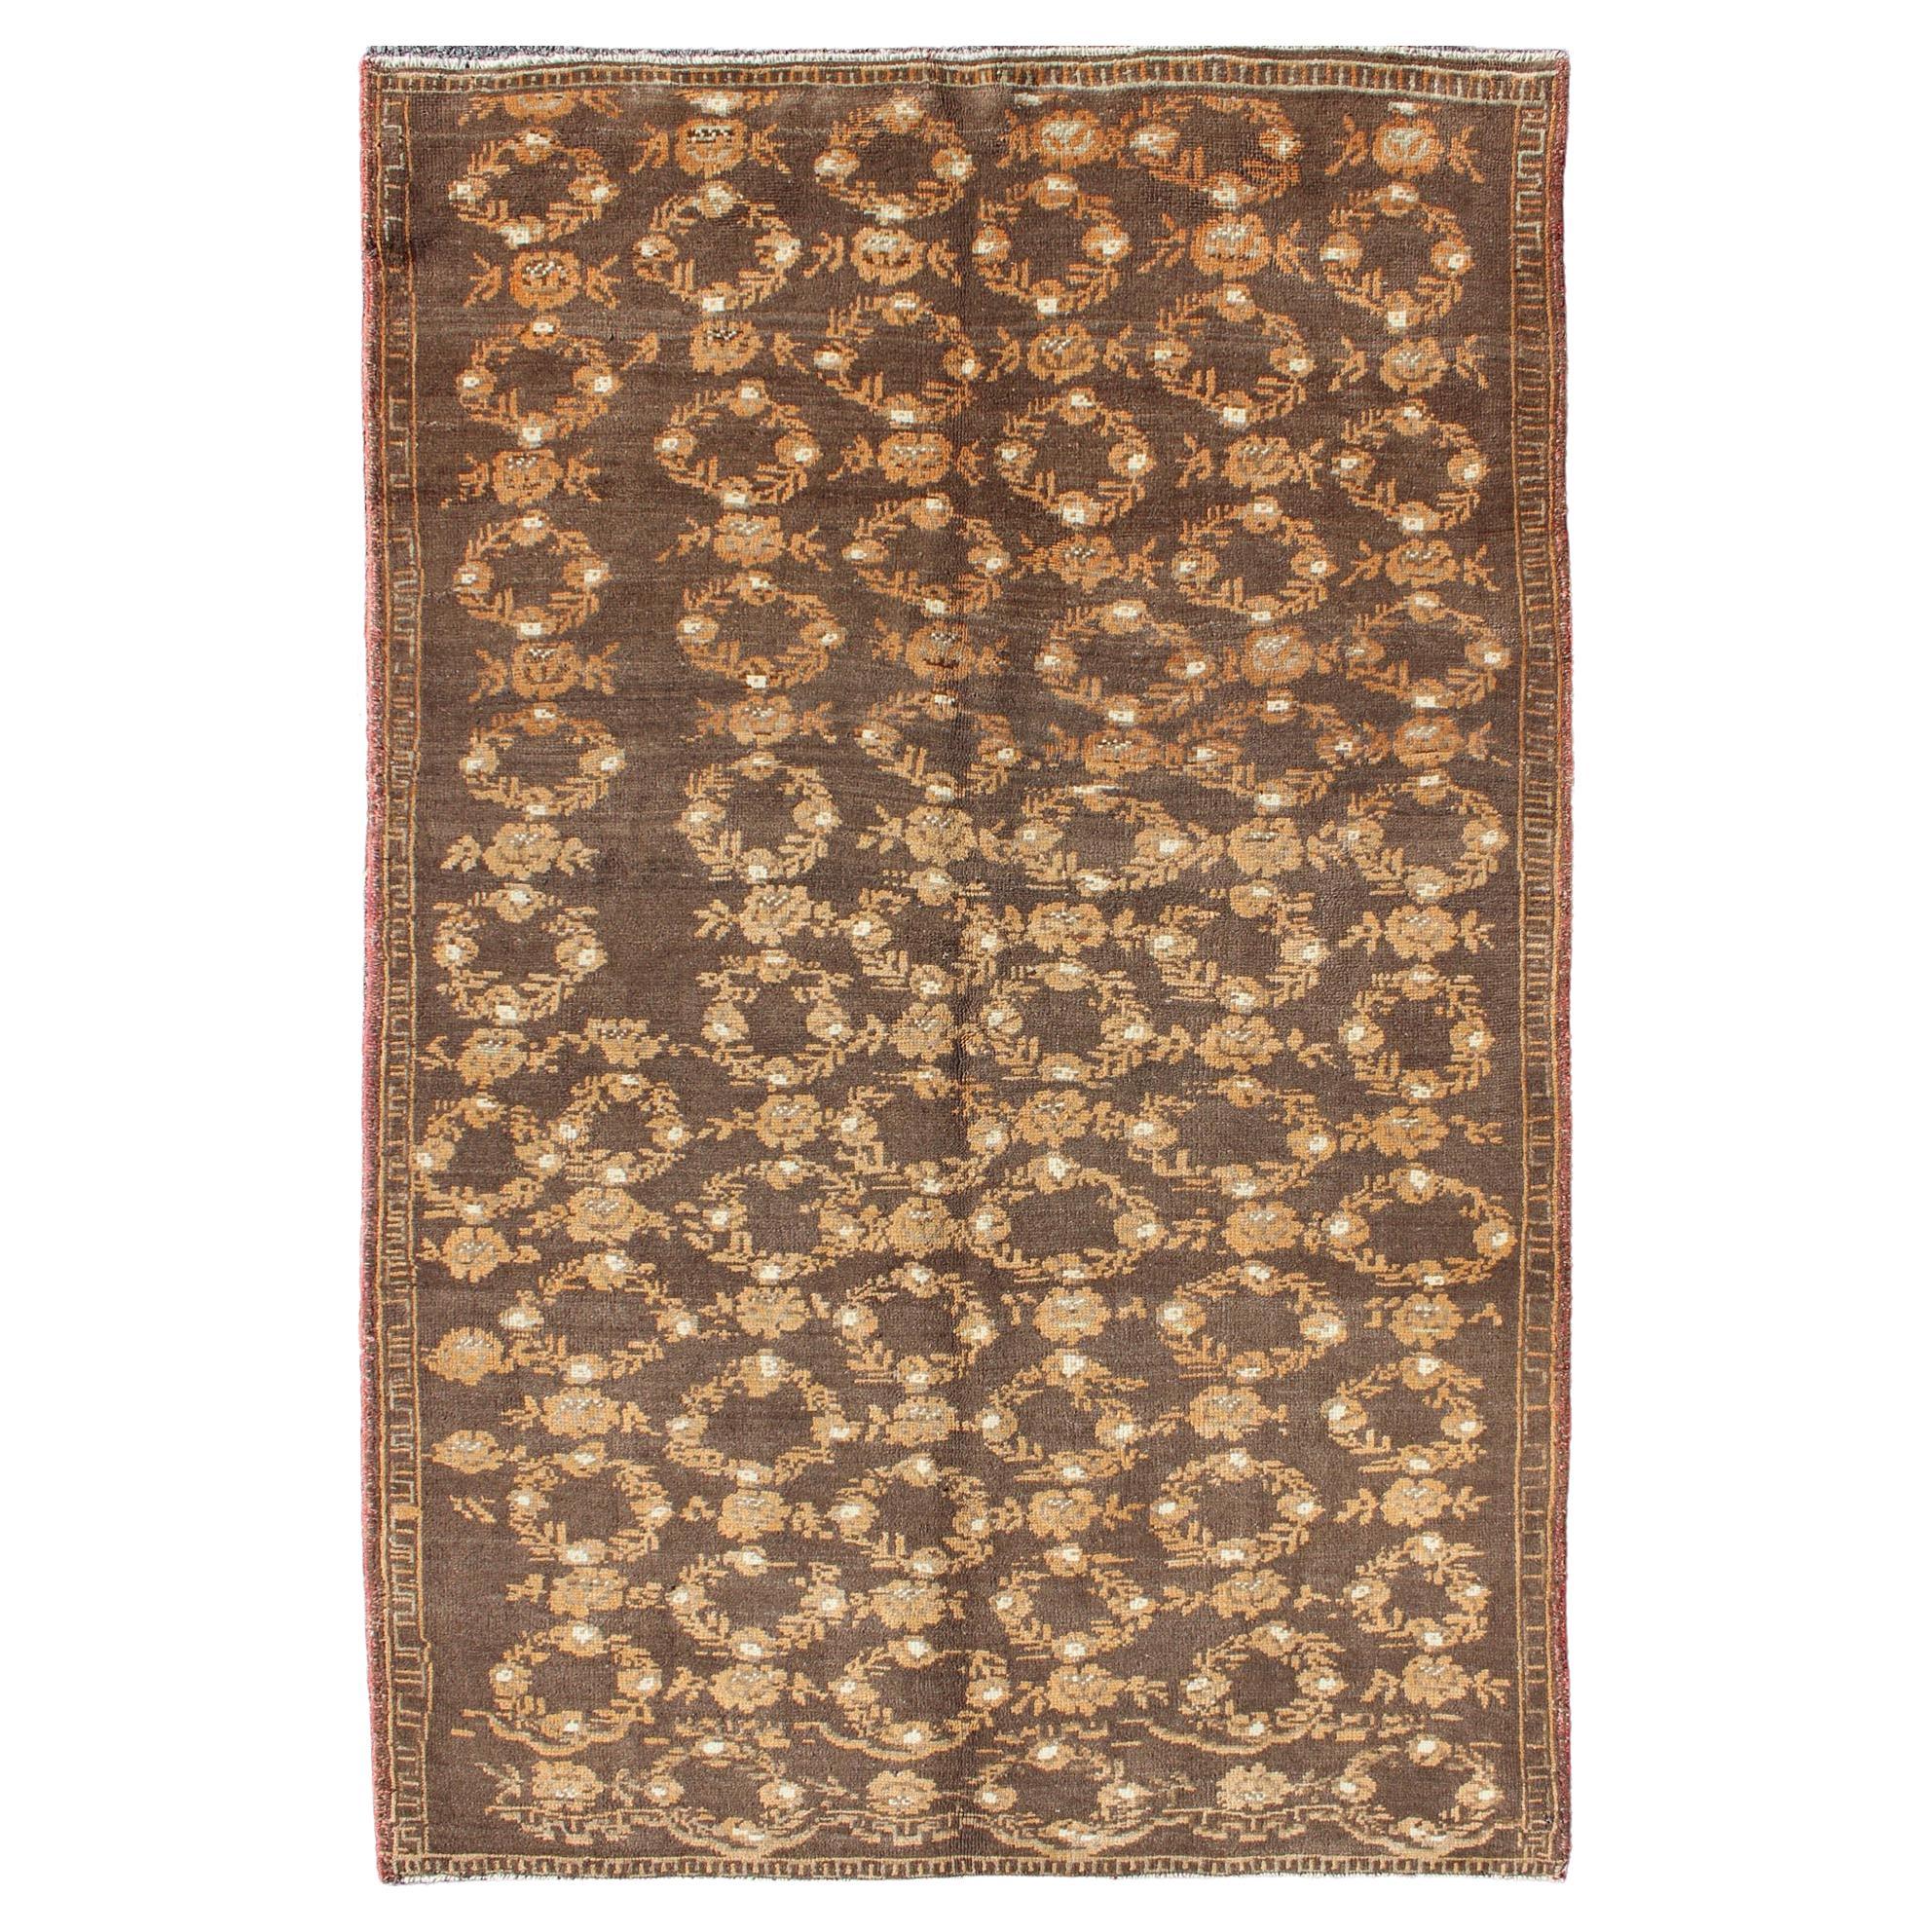 All-Over Floral Wreath Design Turkish Oushak Rug with Brown Background